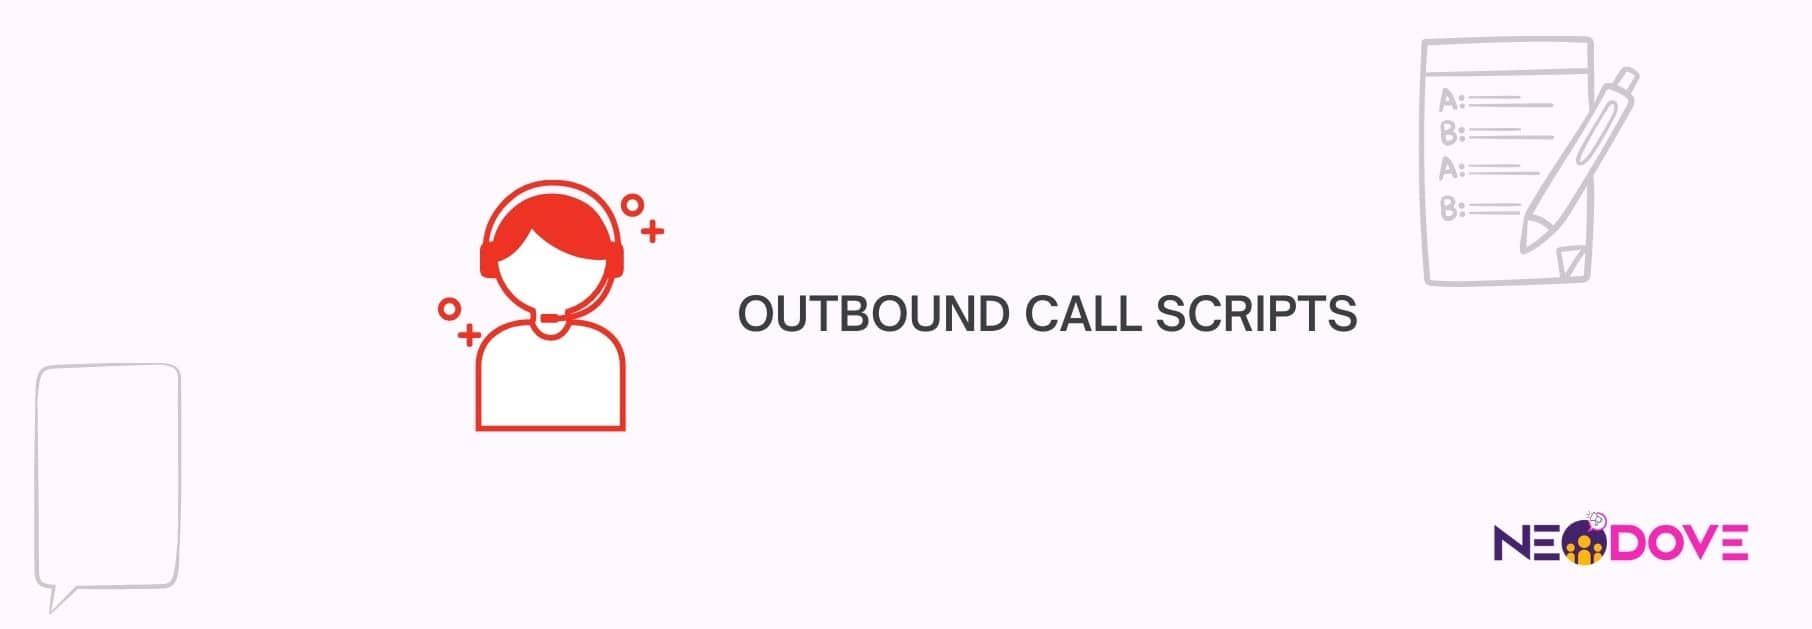 outbound call scripts